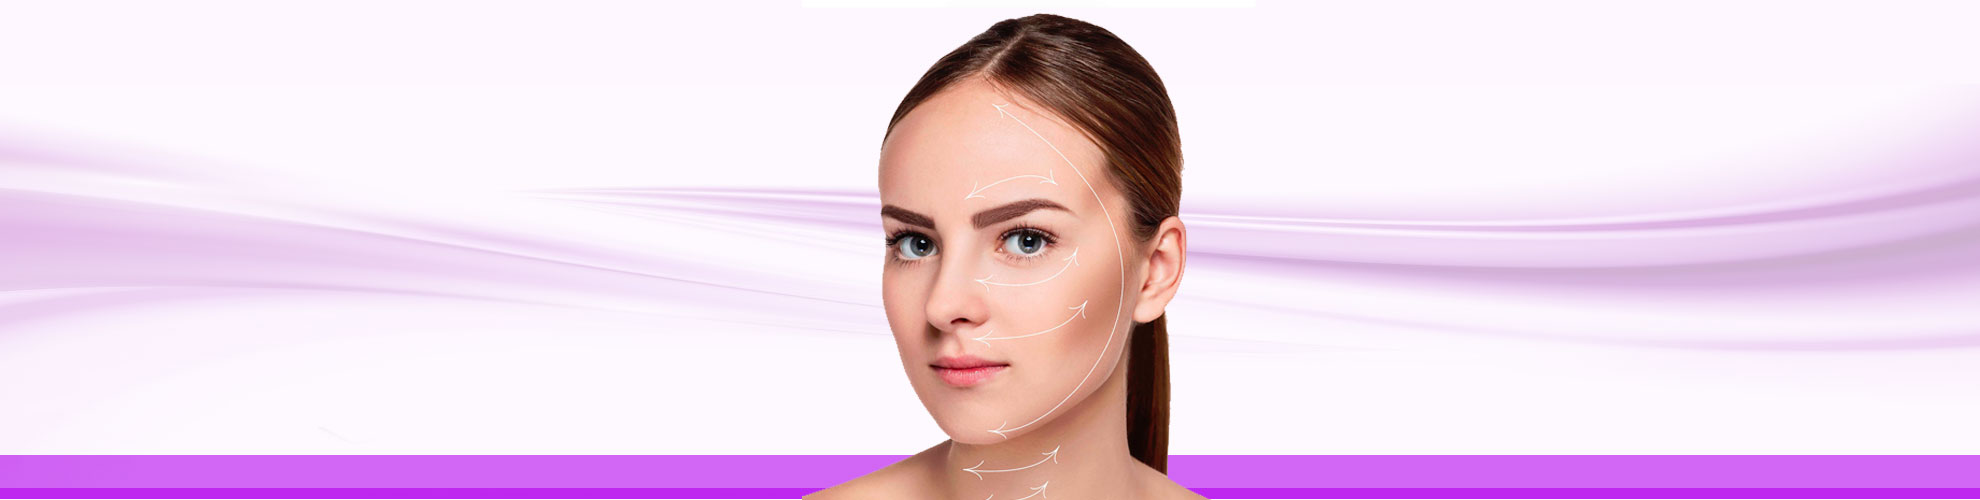 Filler Injections clinic in toronto